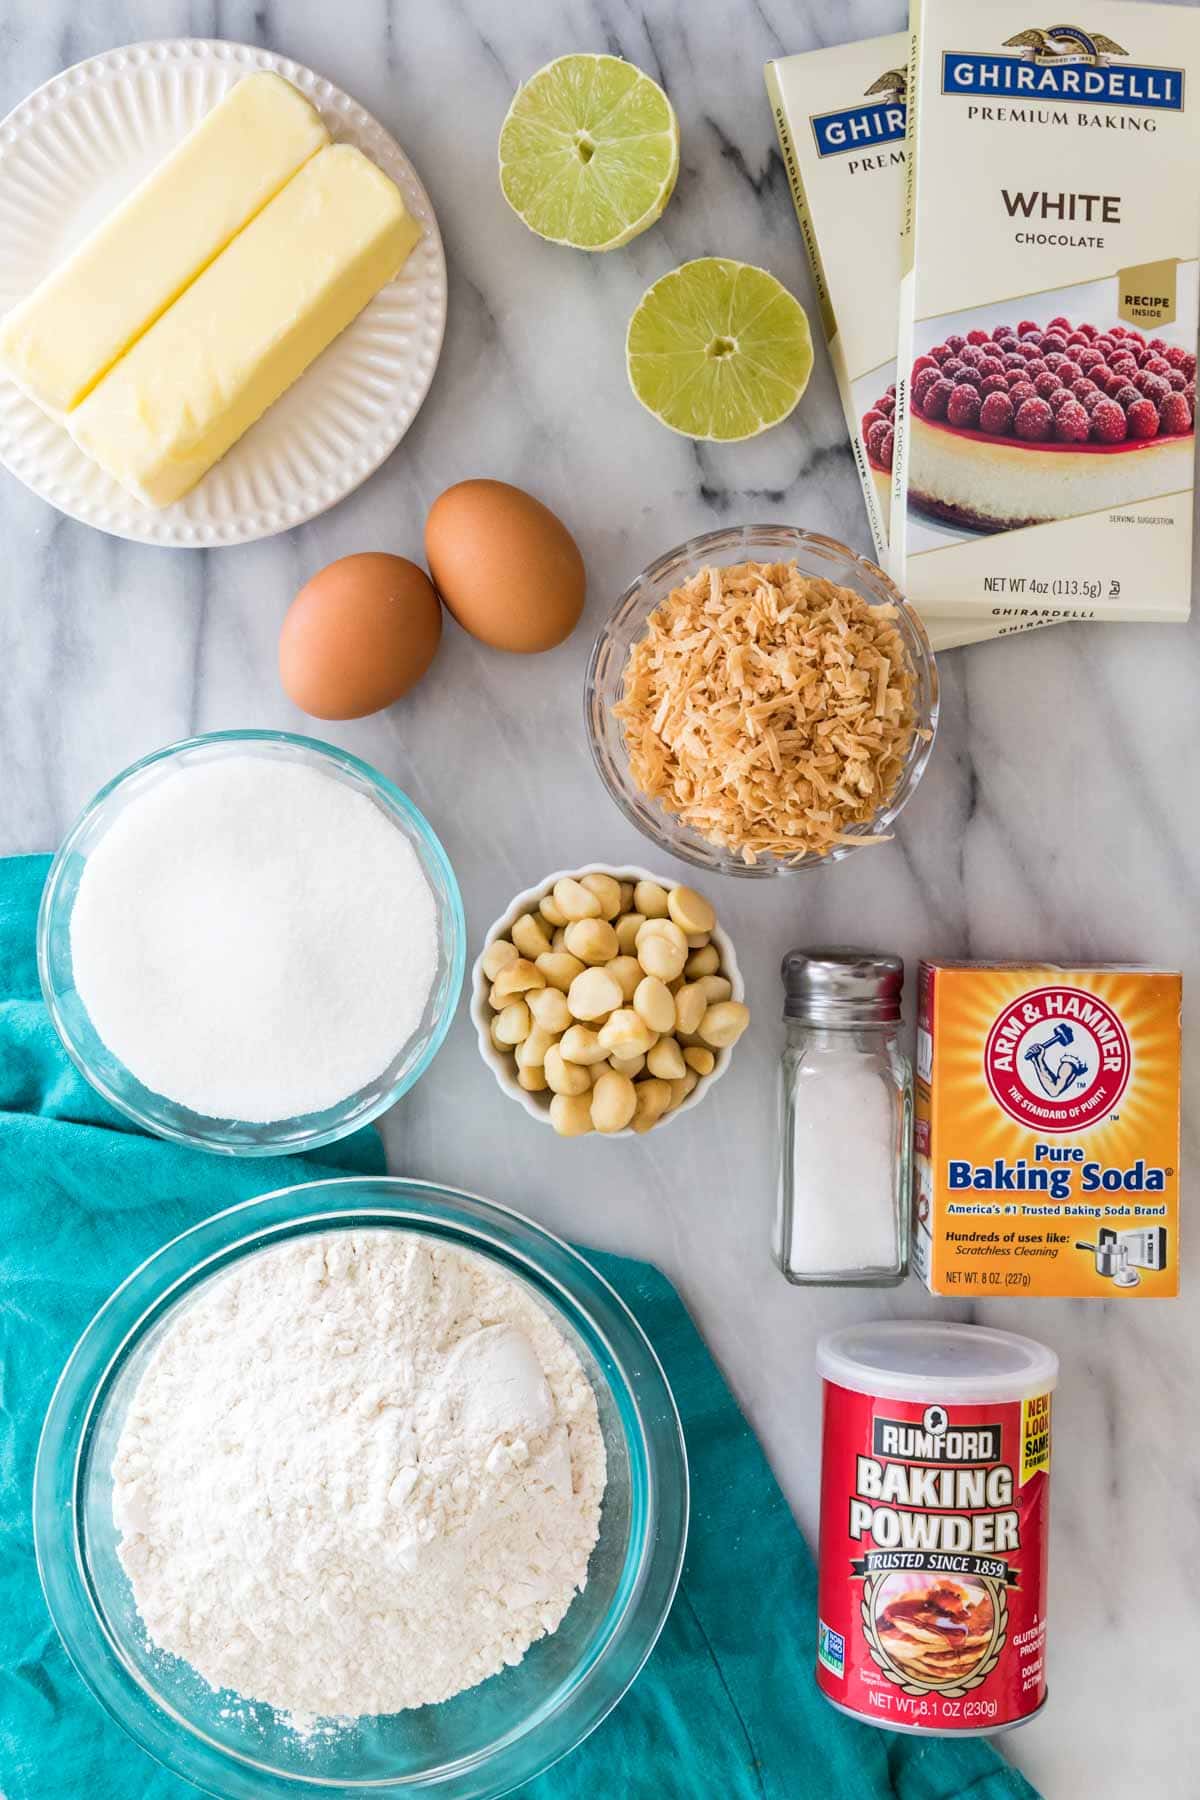 overhead view of ingredients including white chocolate bars, limes, toasted coconut, butter, and more